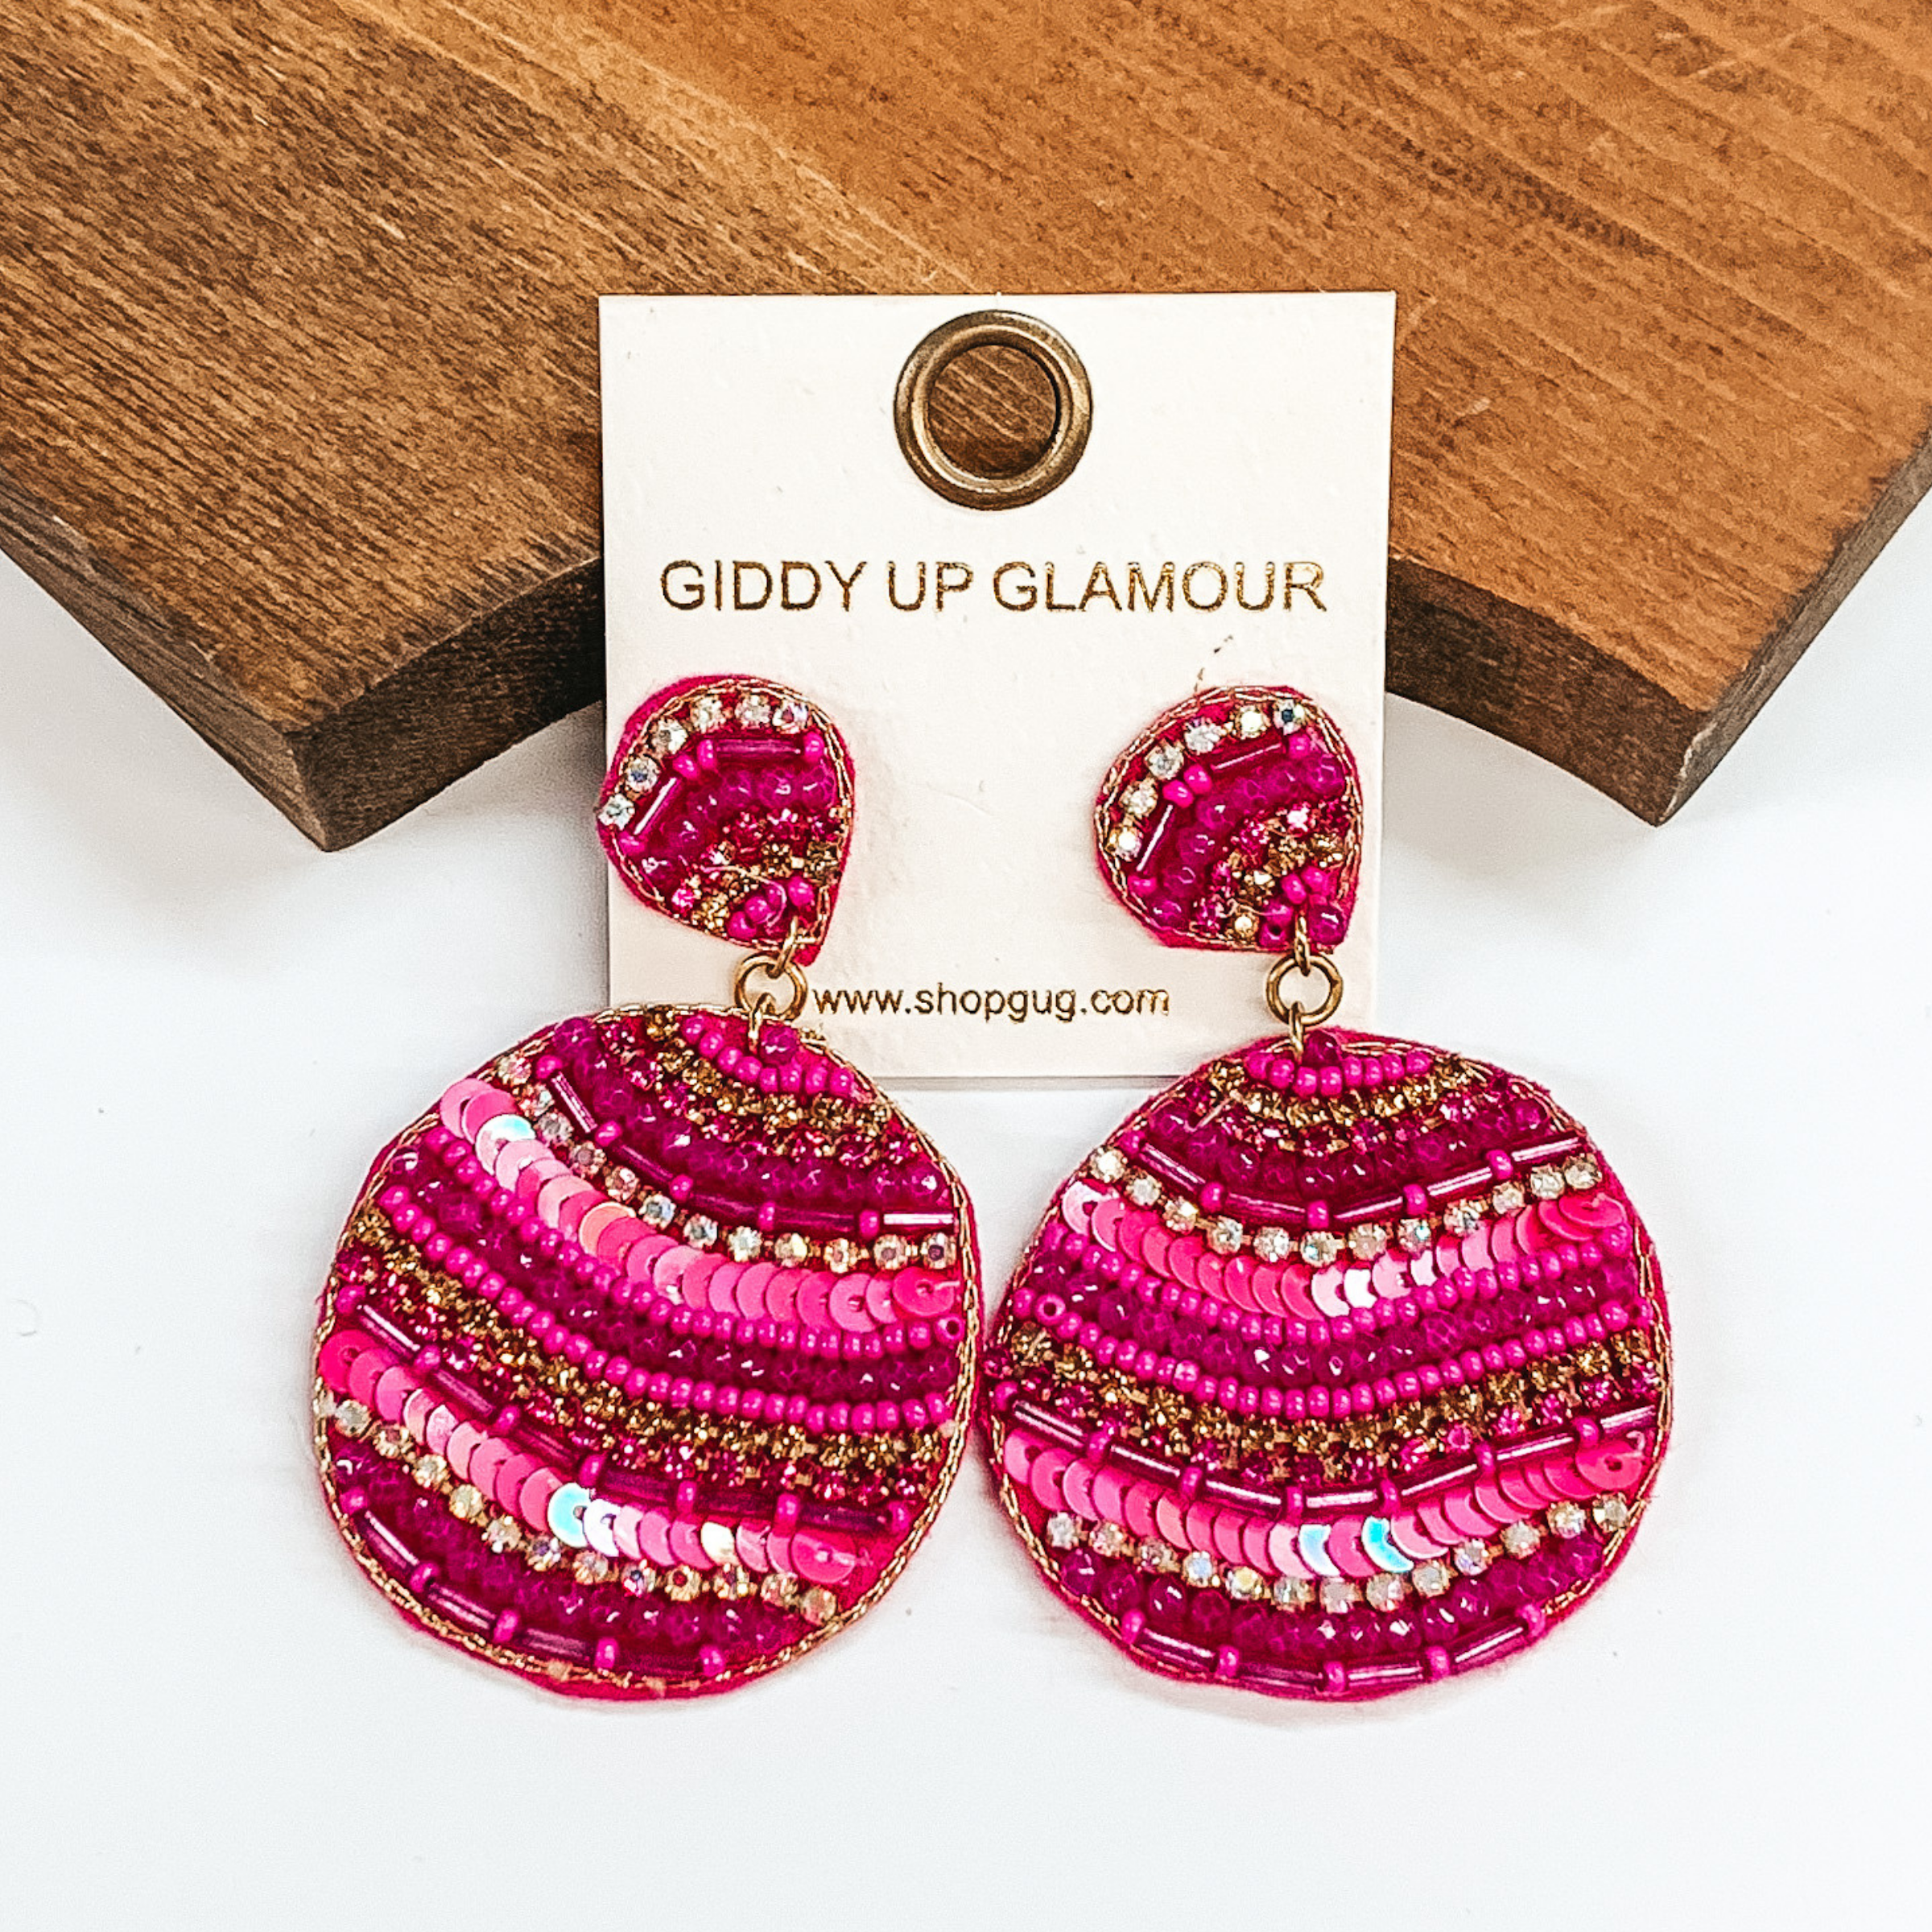 Pink cirle drop earrings with different striped beaded patterns. Striped patterns in long and small  pink beads, pink sequins, with ab, pink, and gold crystals. Taken in a white  background with a brown block as decor.